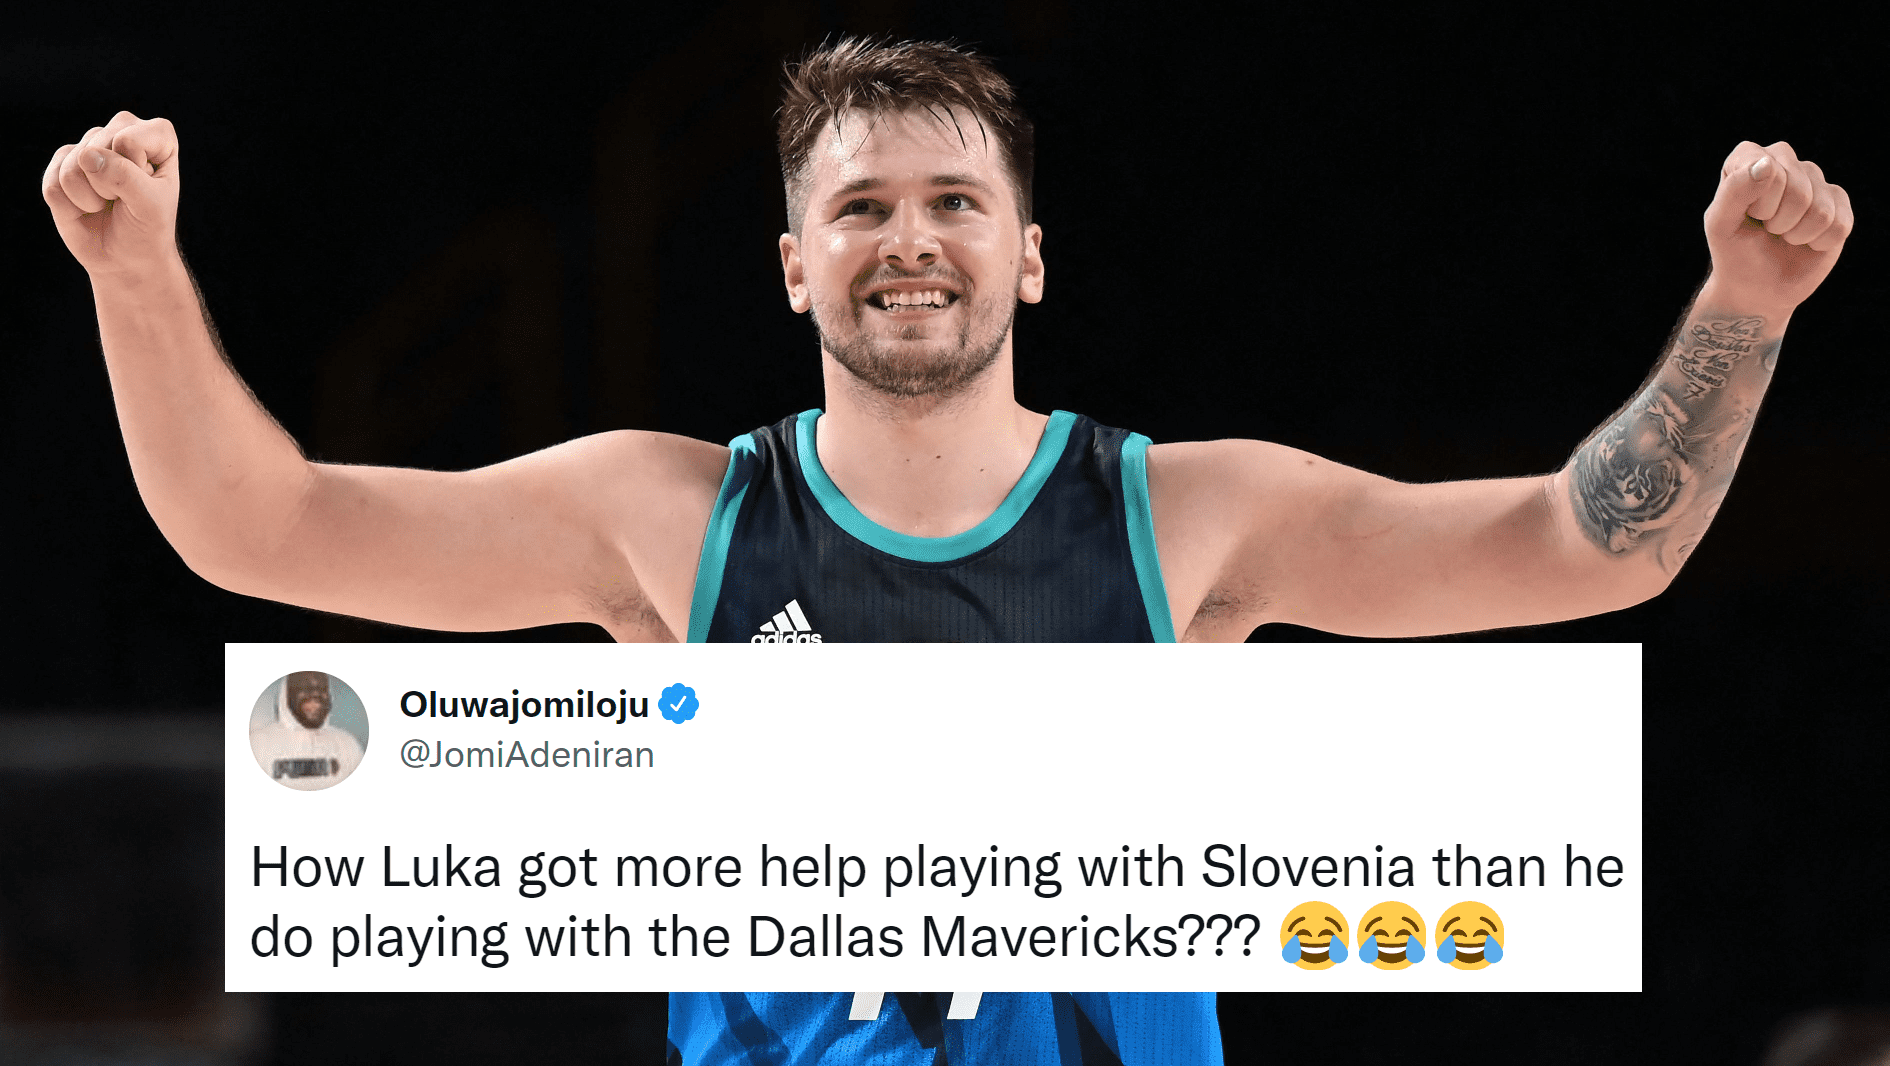 Tokyo Olympics: Luka Doncic's eye-opening 48 points Games debut in